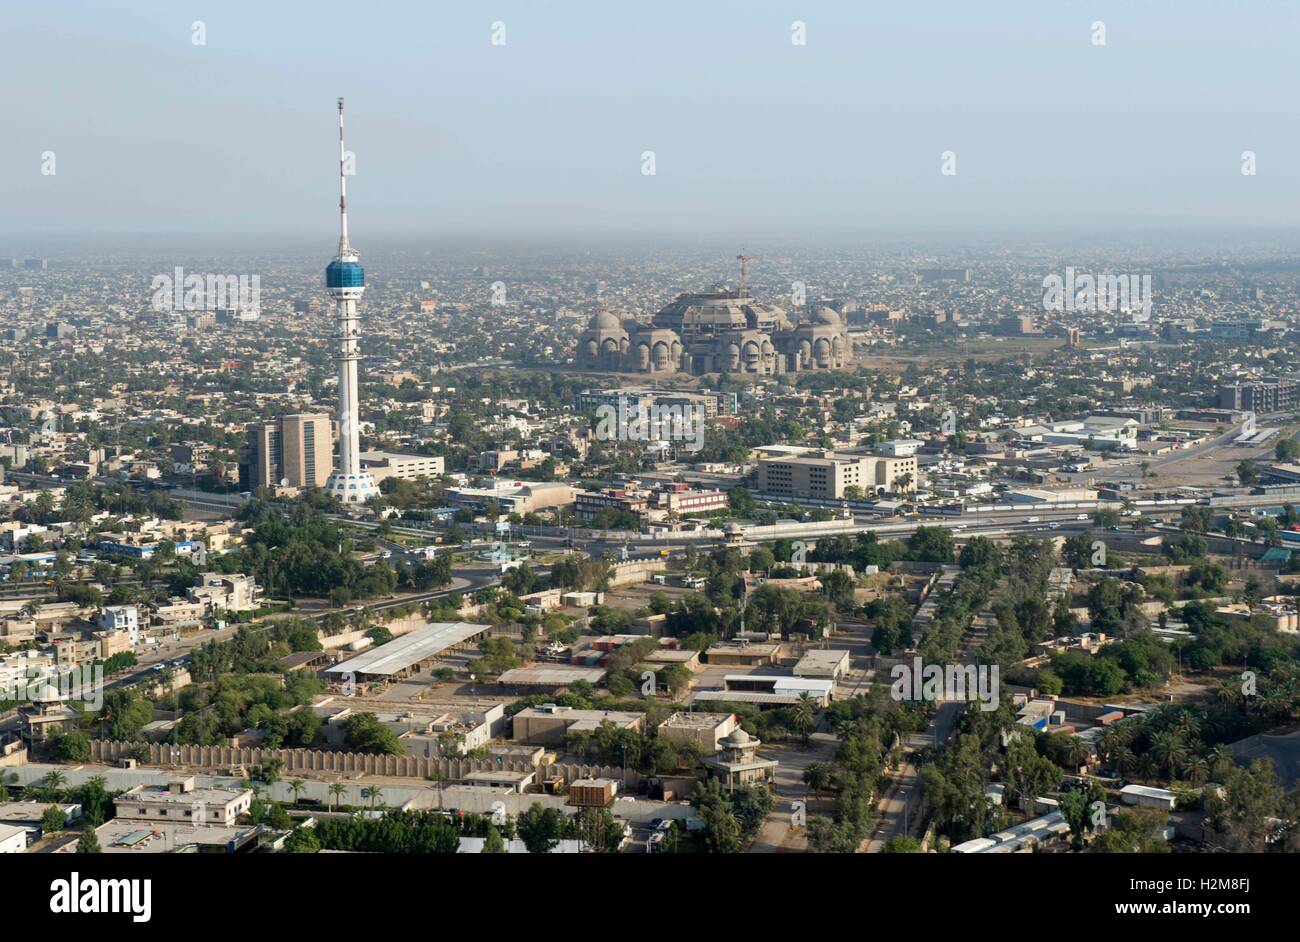 An aerial view of the Al-Rahman mosque and historic area of the city July 20, 2016 in Baghdad, Iraq. Stock Photo